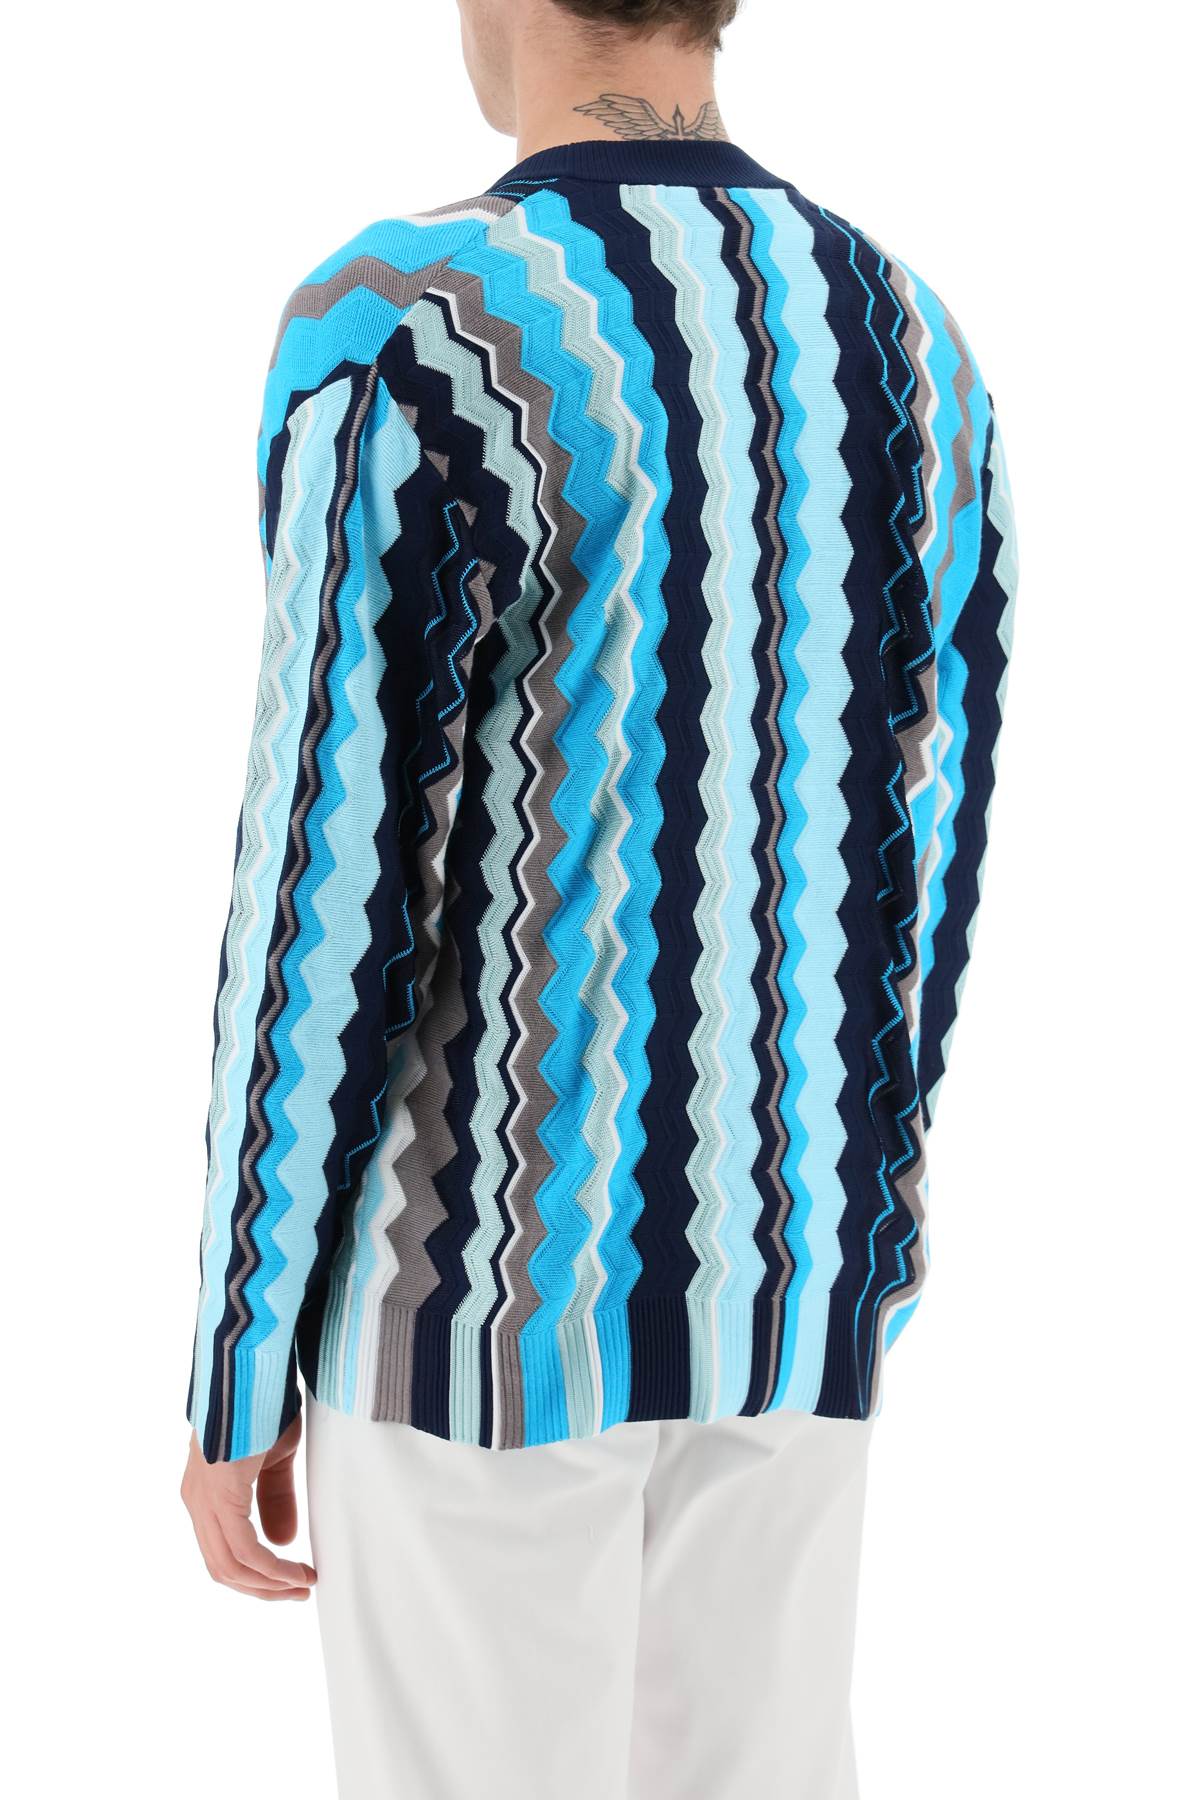 Shop Missoni Patterned Cardigan In White And Blue Tones (blue)